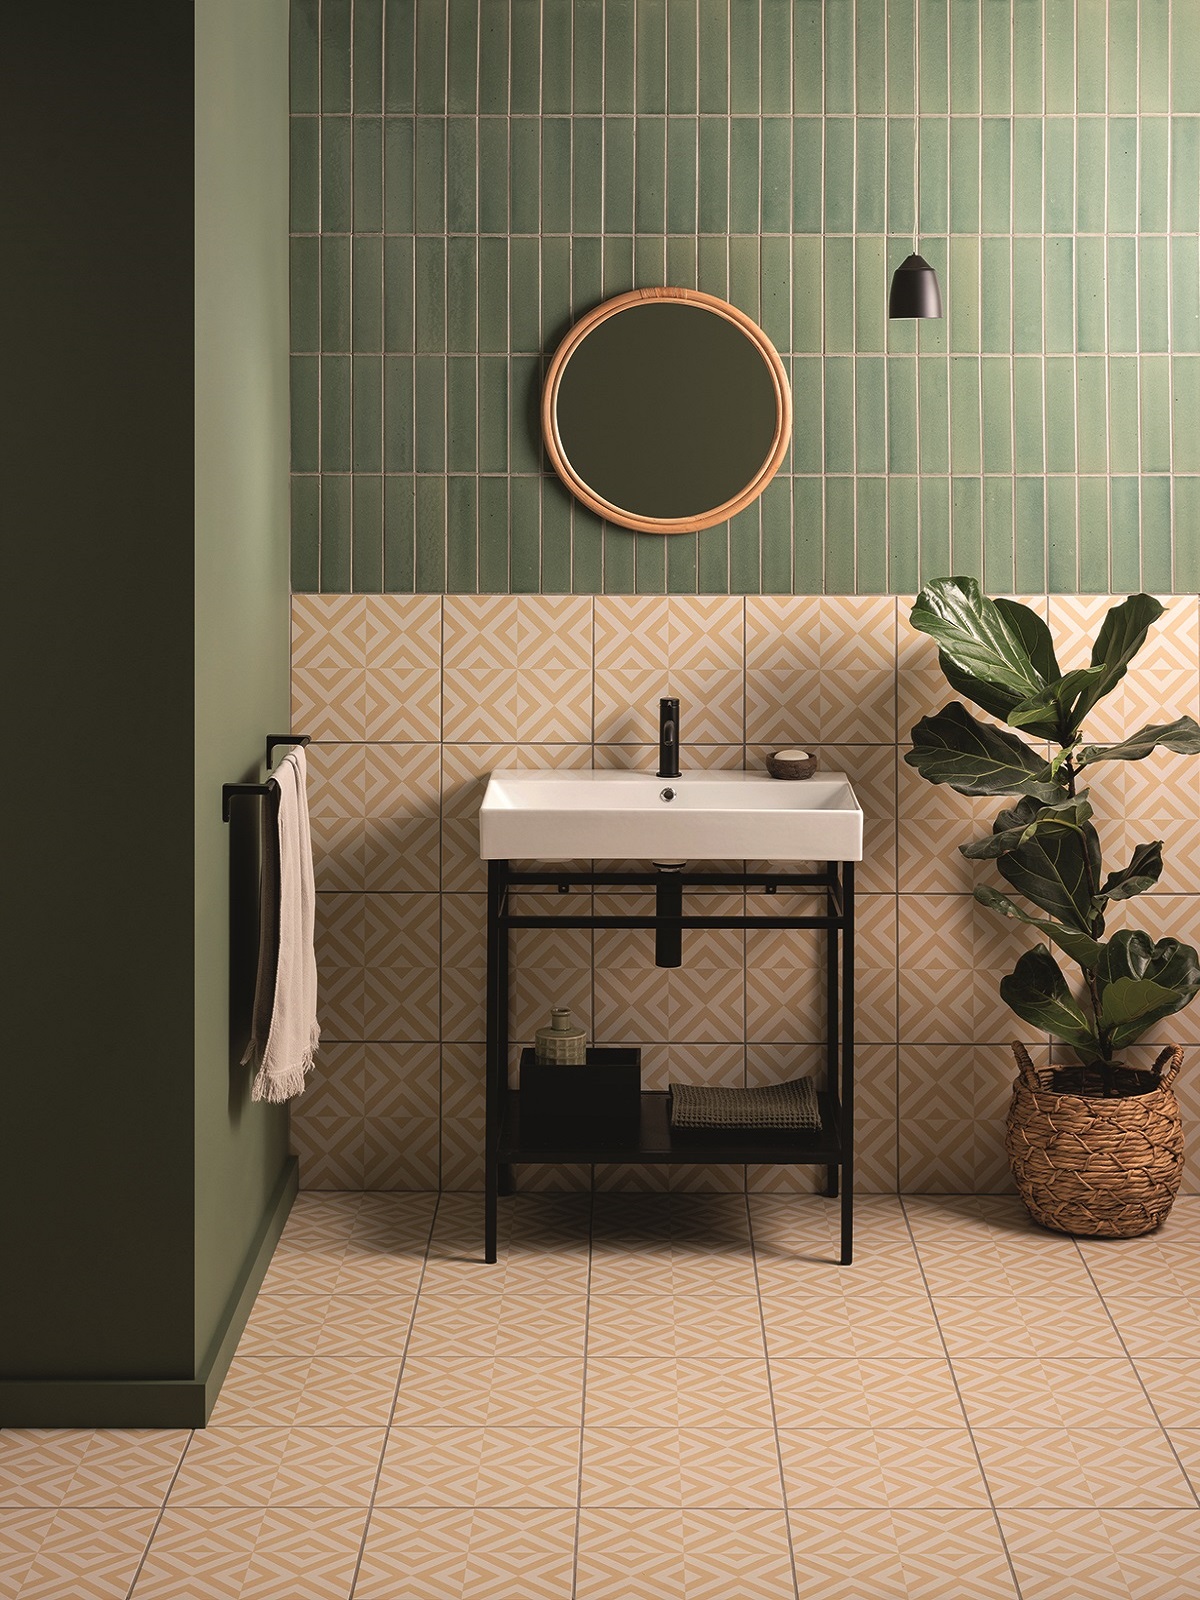 olive green and pink contrat tiles in bathroom with wood and plant